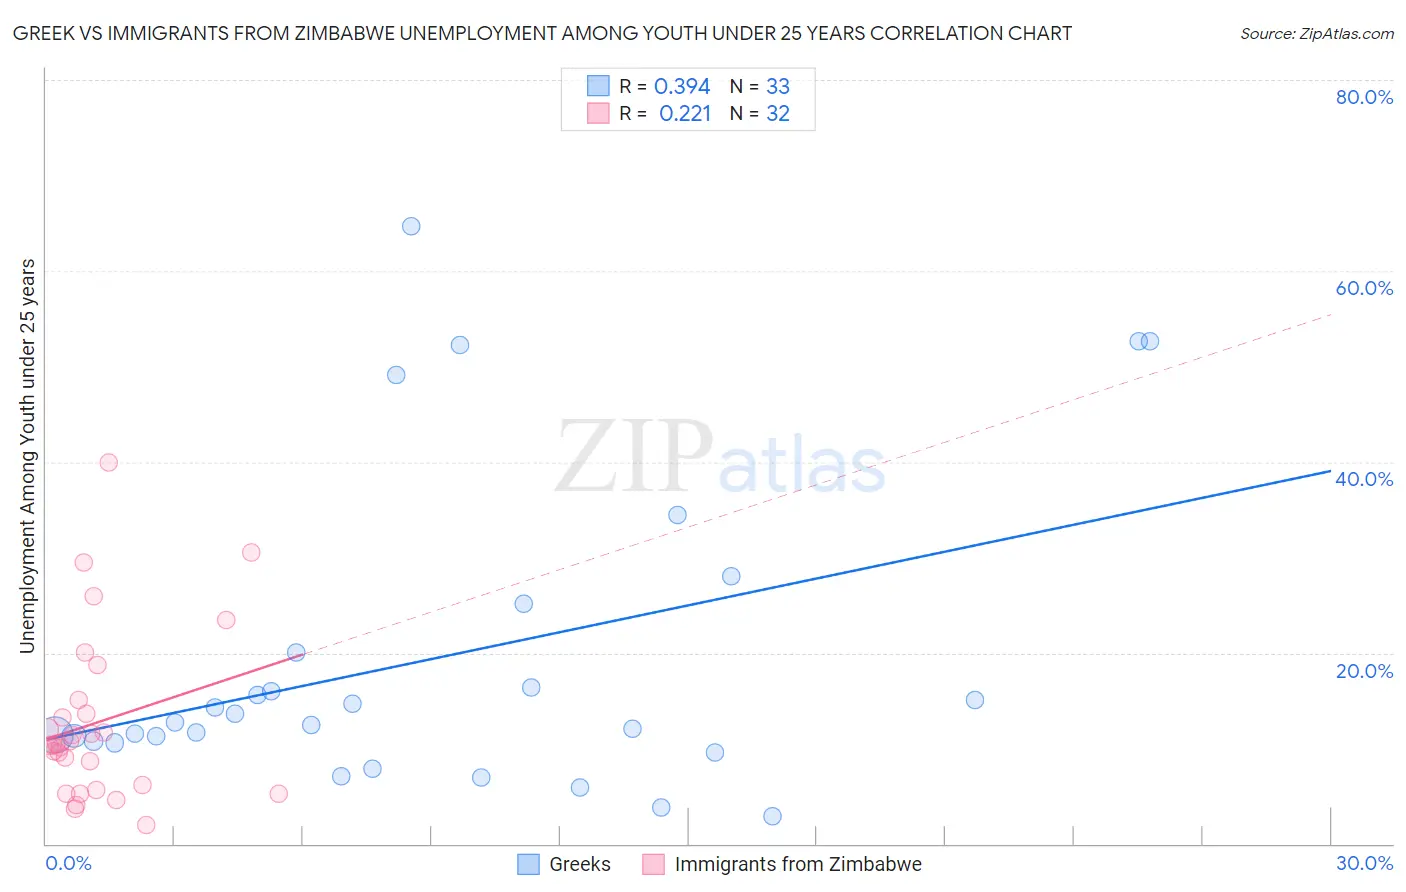 Greek vs Immigrants from Zimbabwe Unemployment Among Youth under 25 years